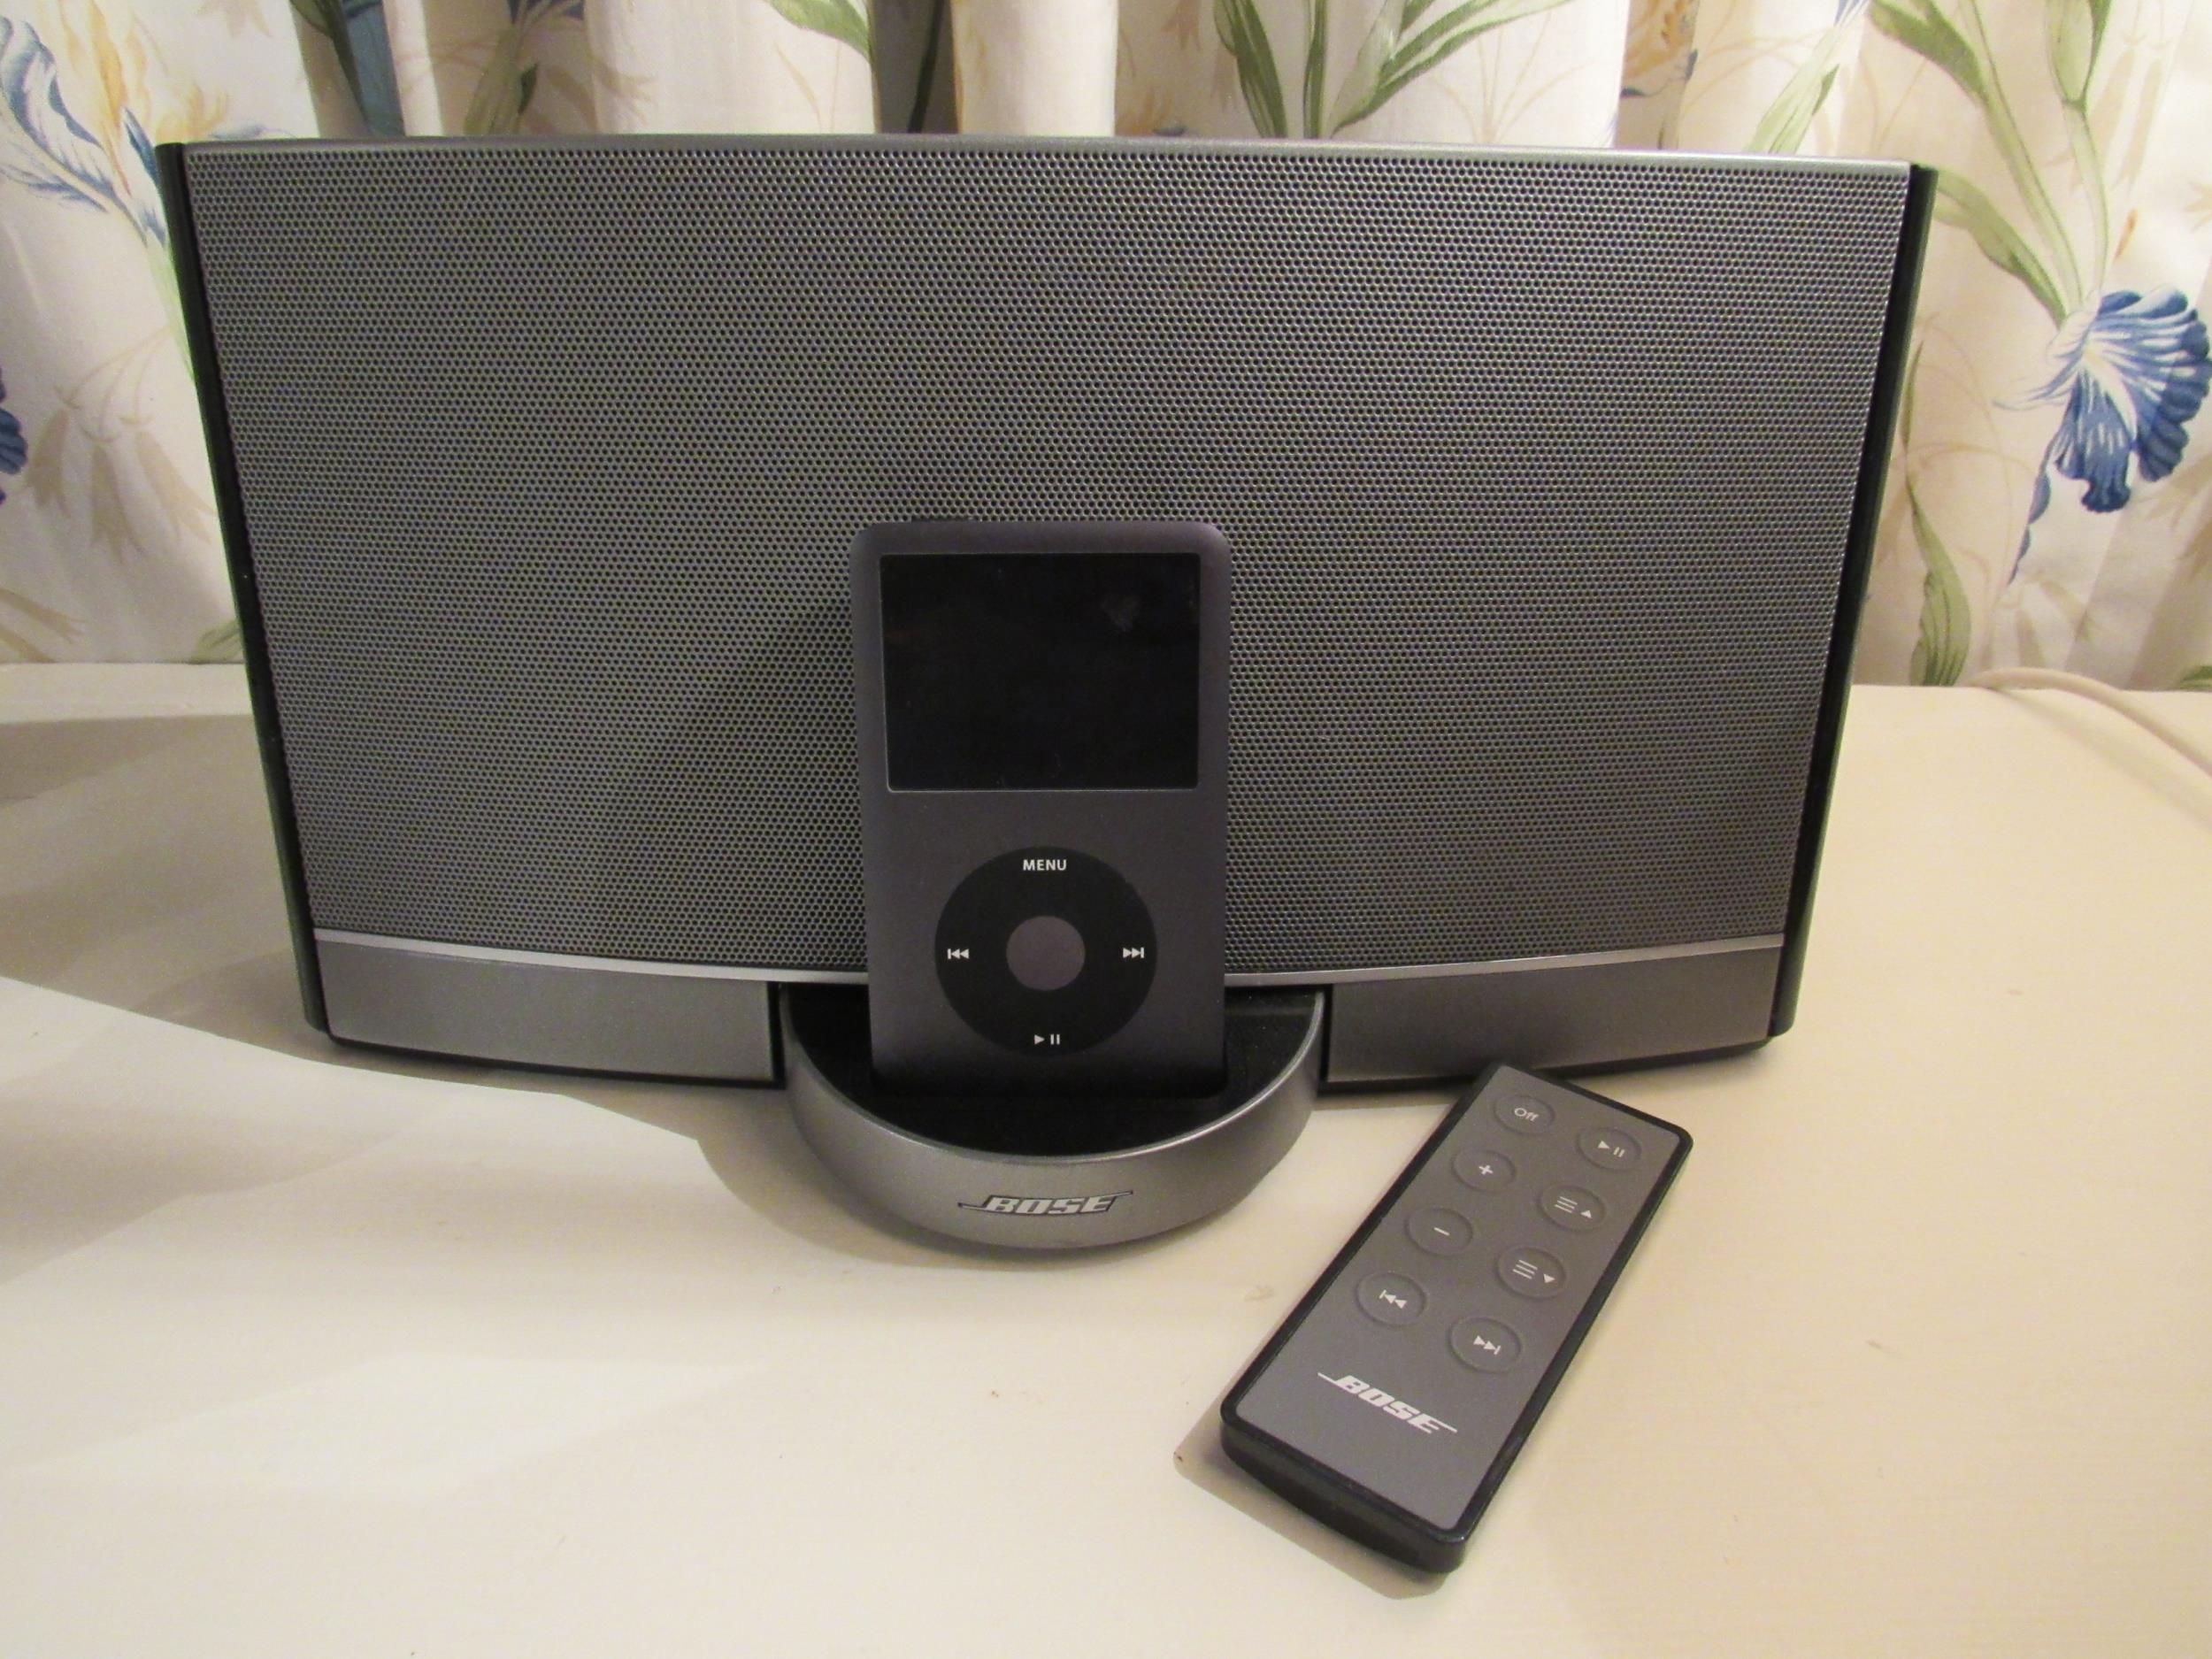 A Bose docking station with Ipod 160GB MODEL NUMBER A138